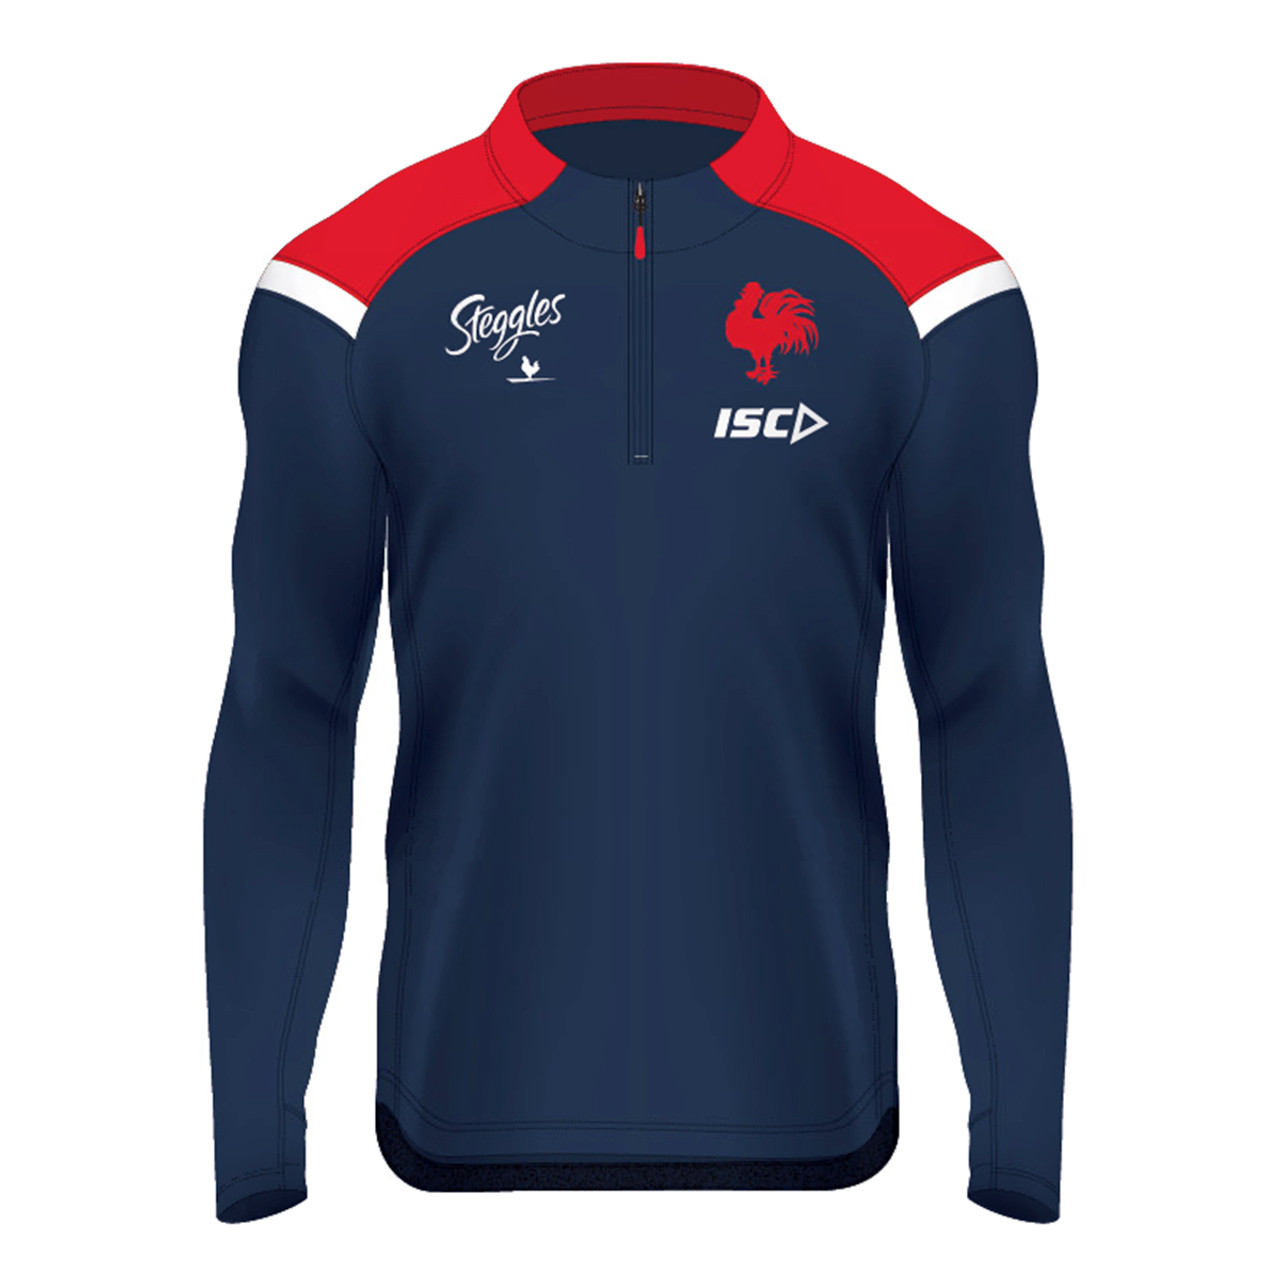 womens roosters jersey